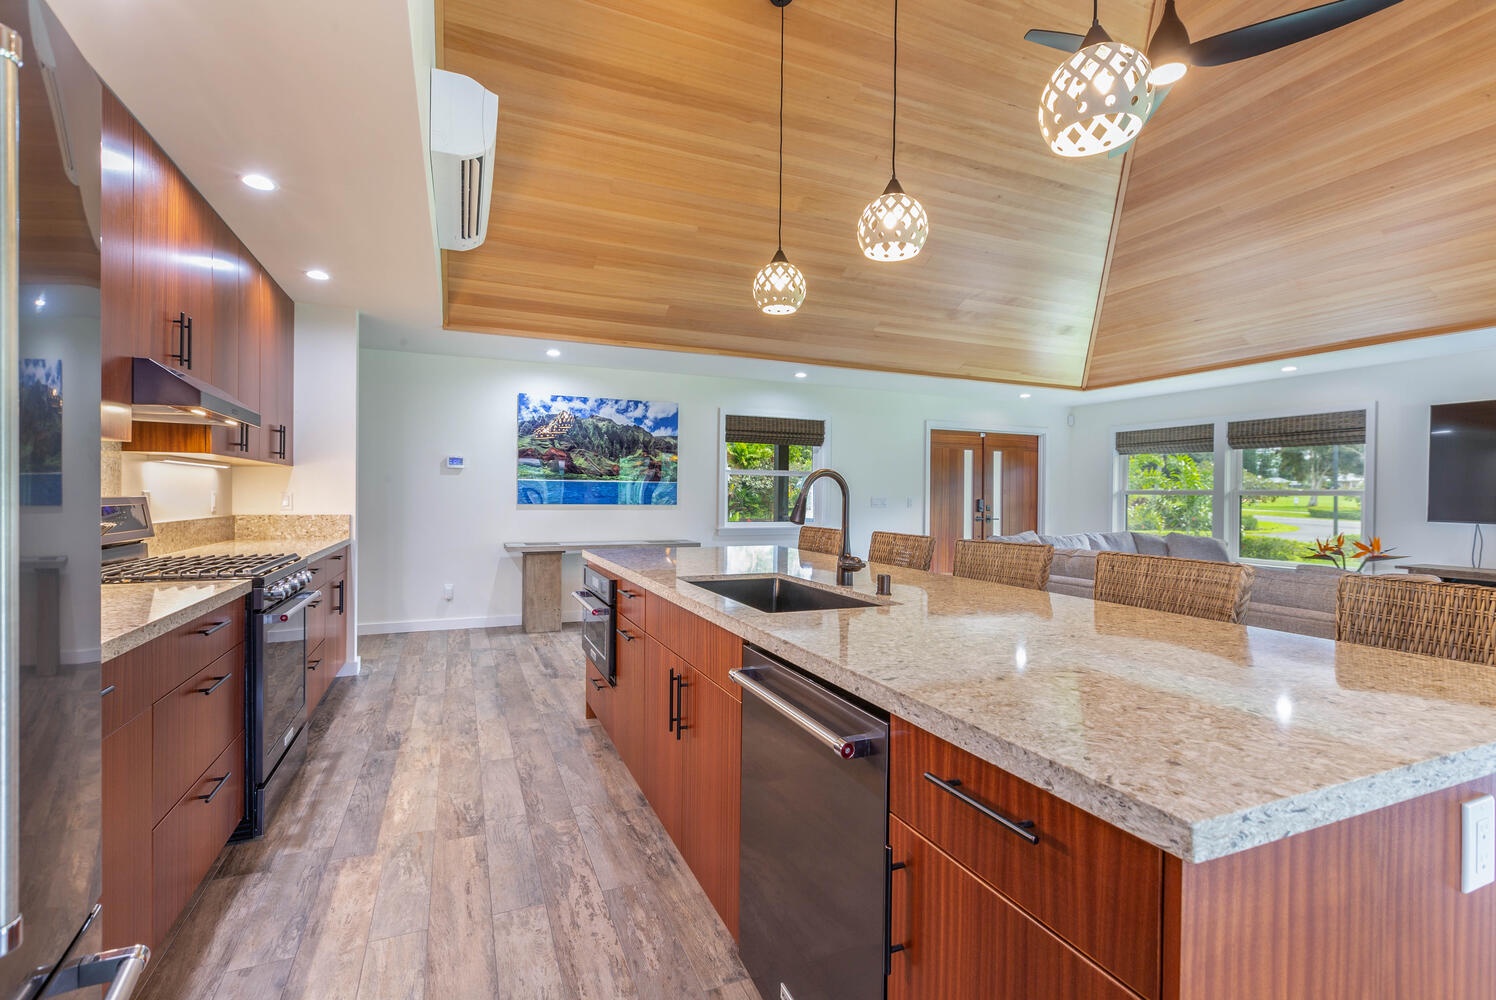 Princeville Vacation Rentals, Aloha Villa - Spacious and modern kitchen with lots of counter space